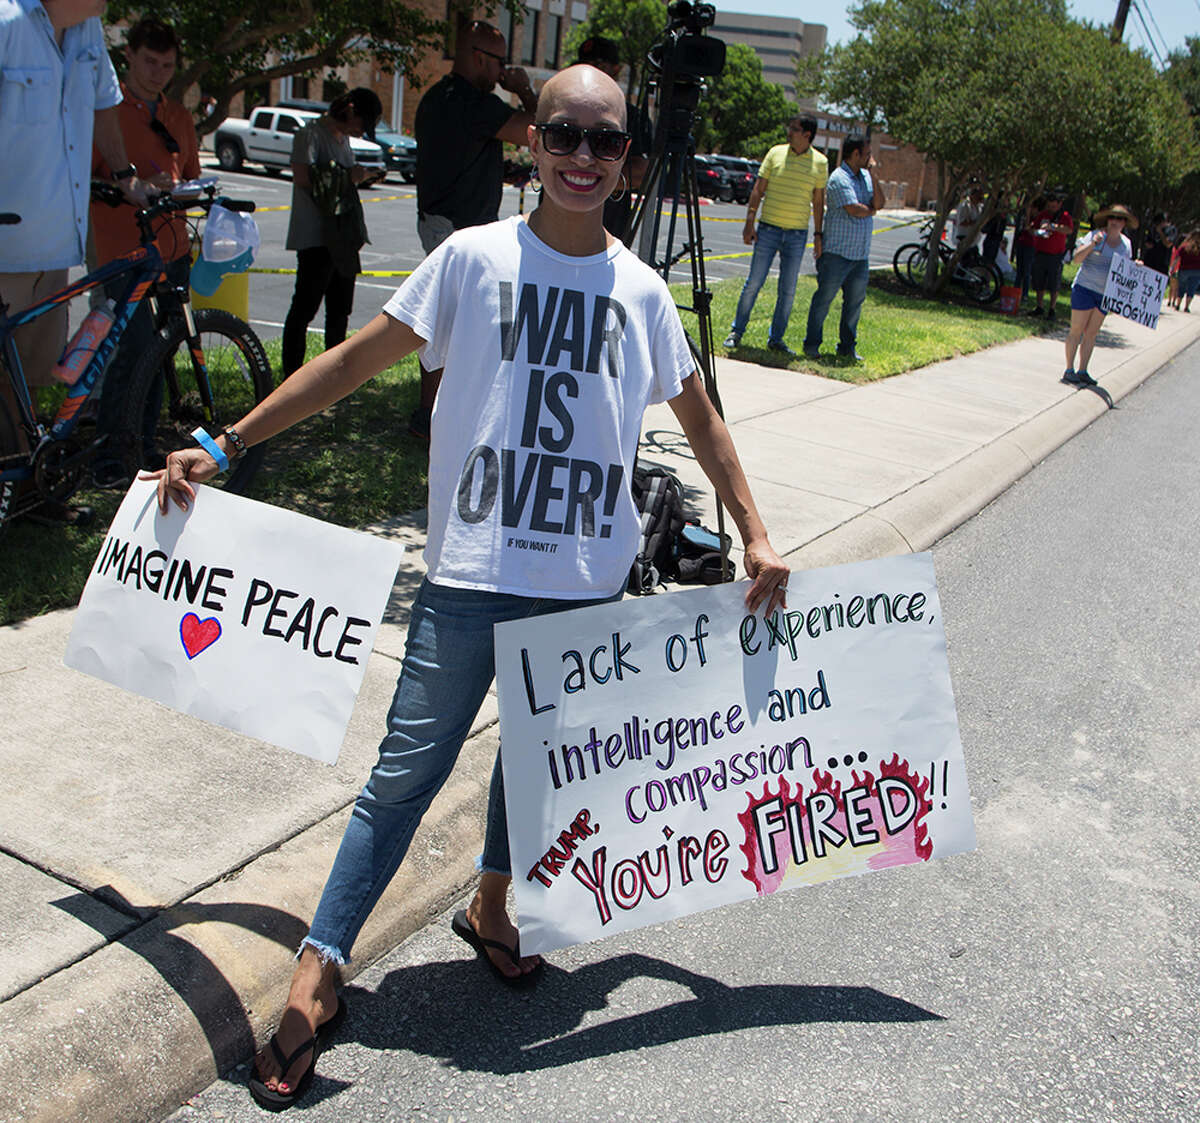 Hundreds of demonstrators assembled for Republican presidential candidate Donald Trump's visit to San Antonio, gathering near his private fundraiser at Oak Hills Country Club on June 17, 2016